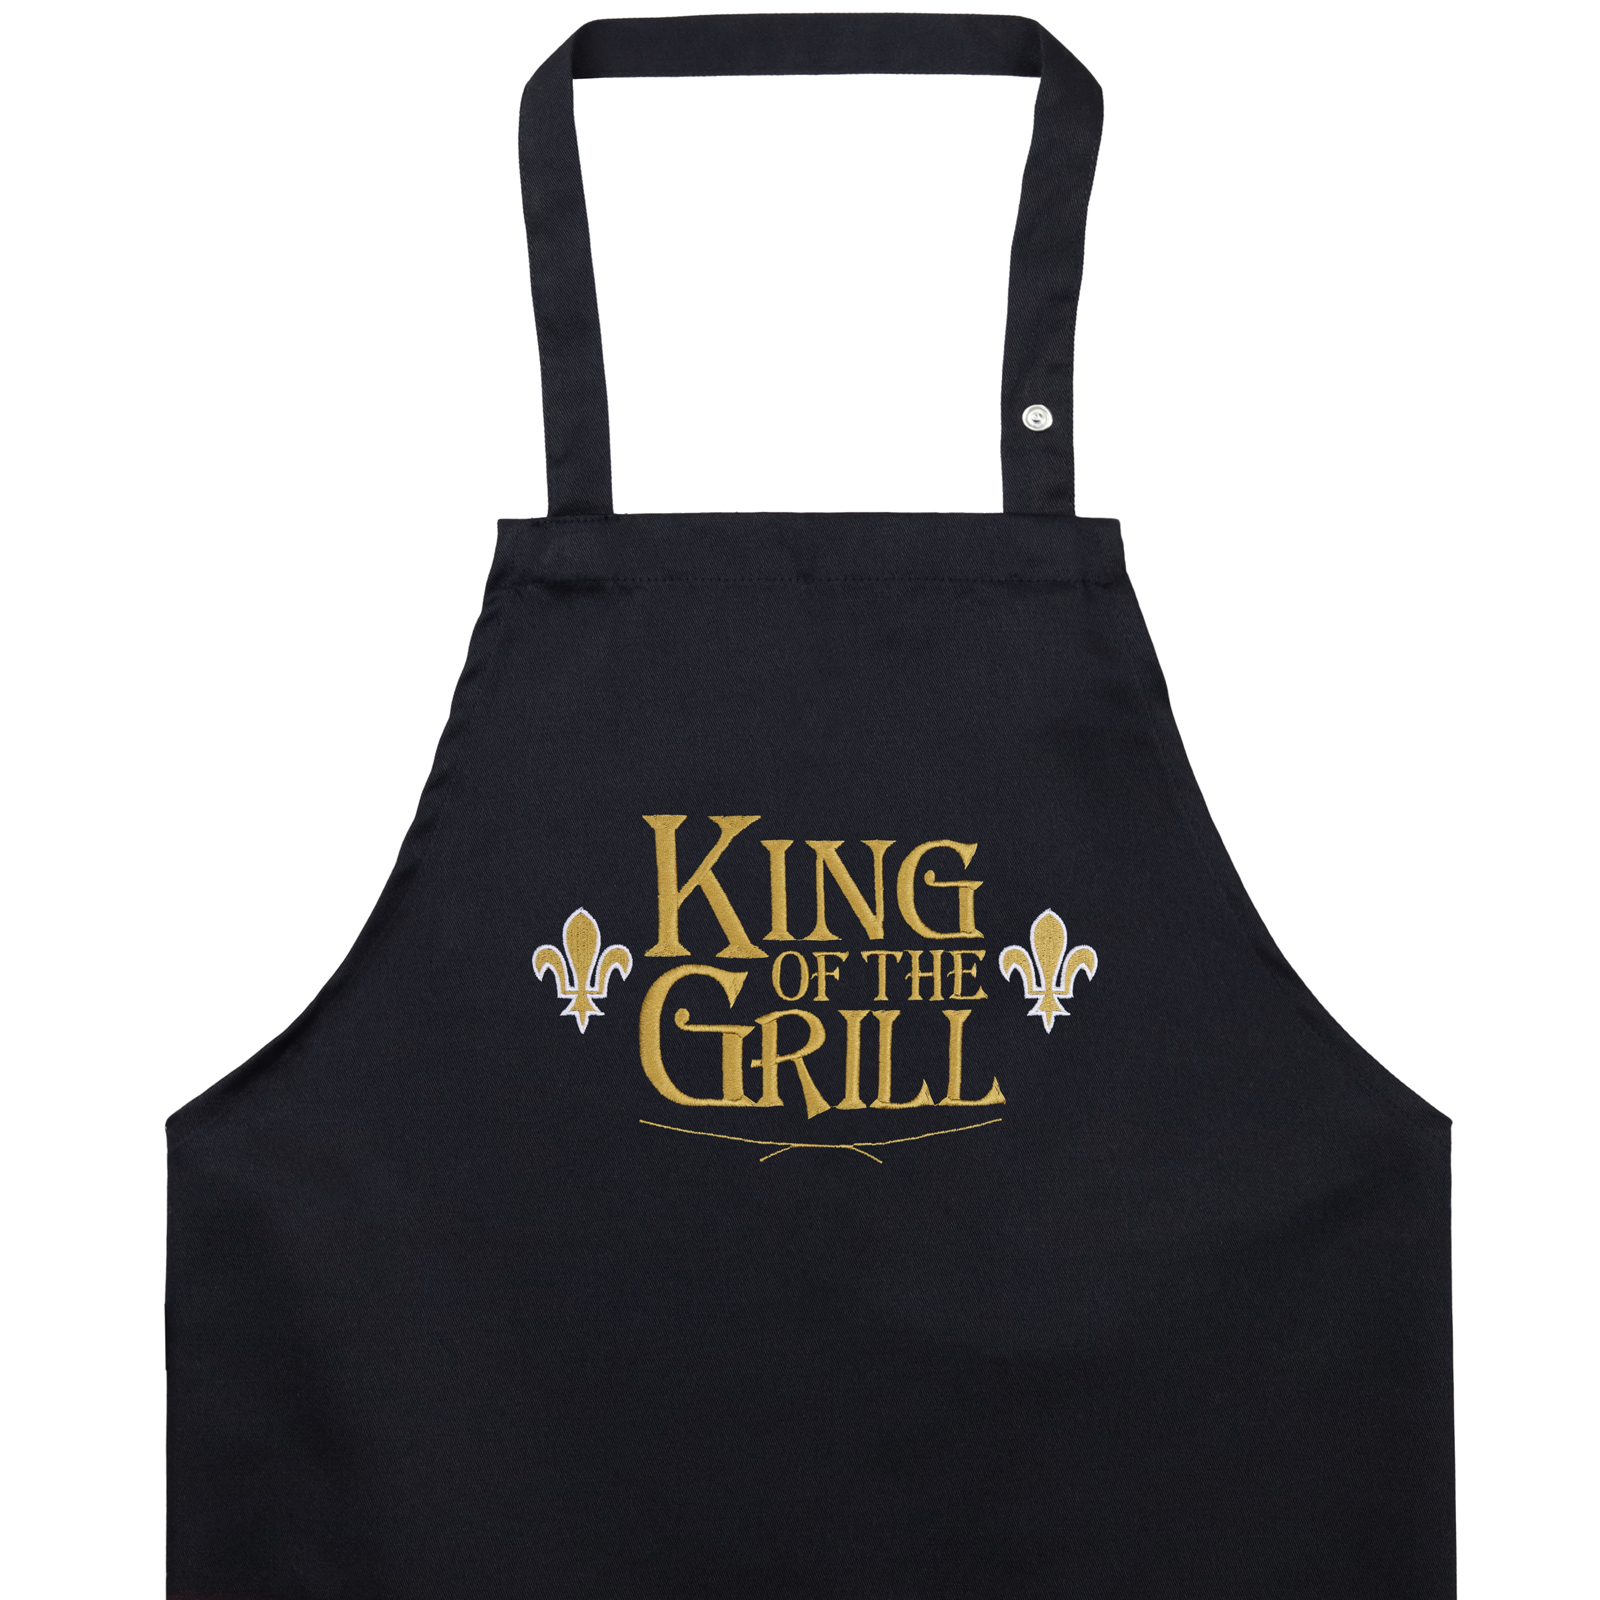 King of the grill - Lilie- Grillschürze